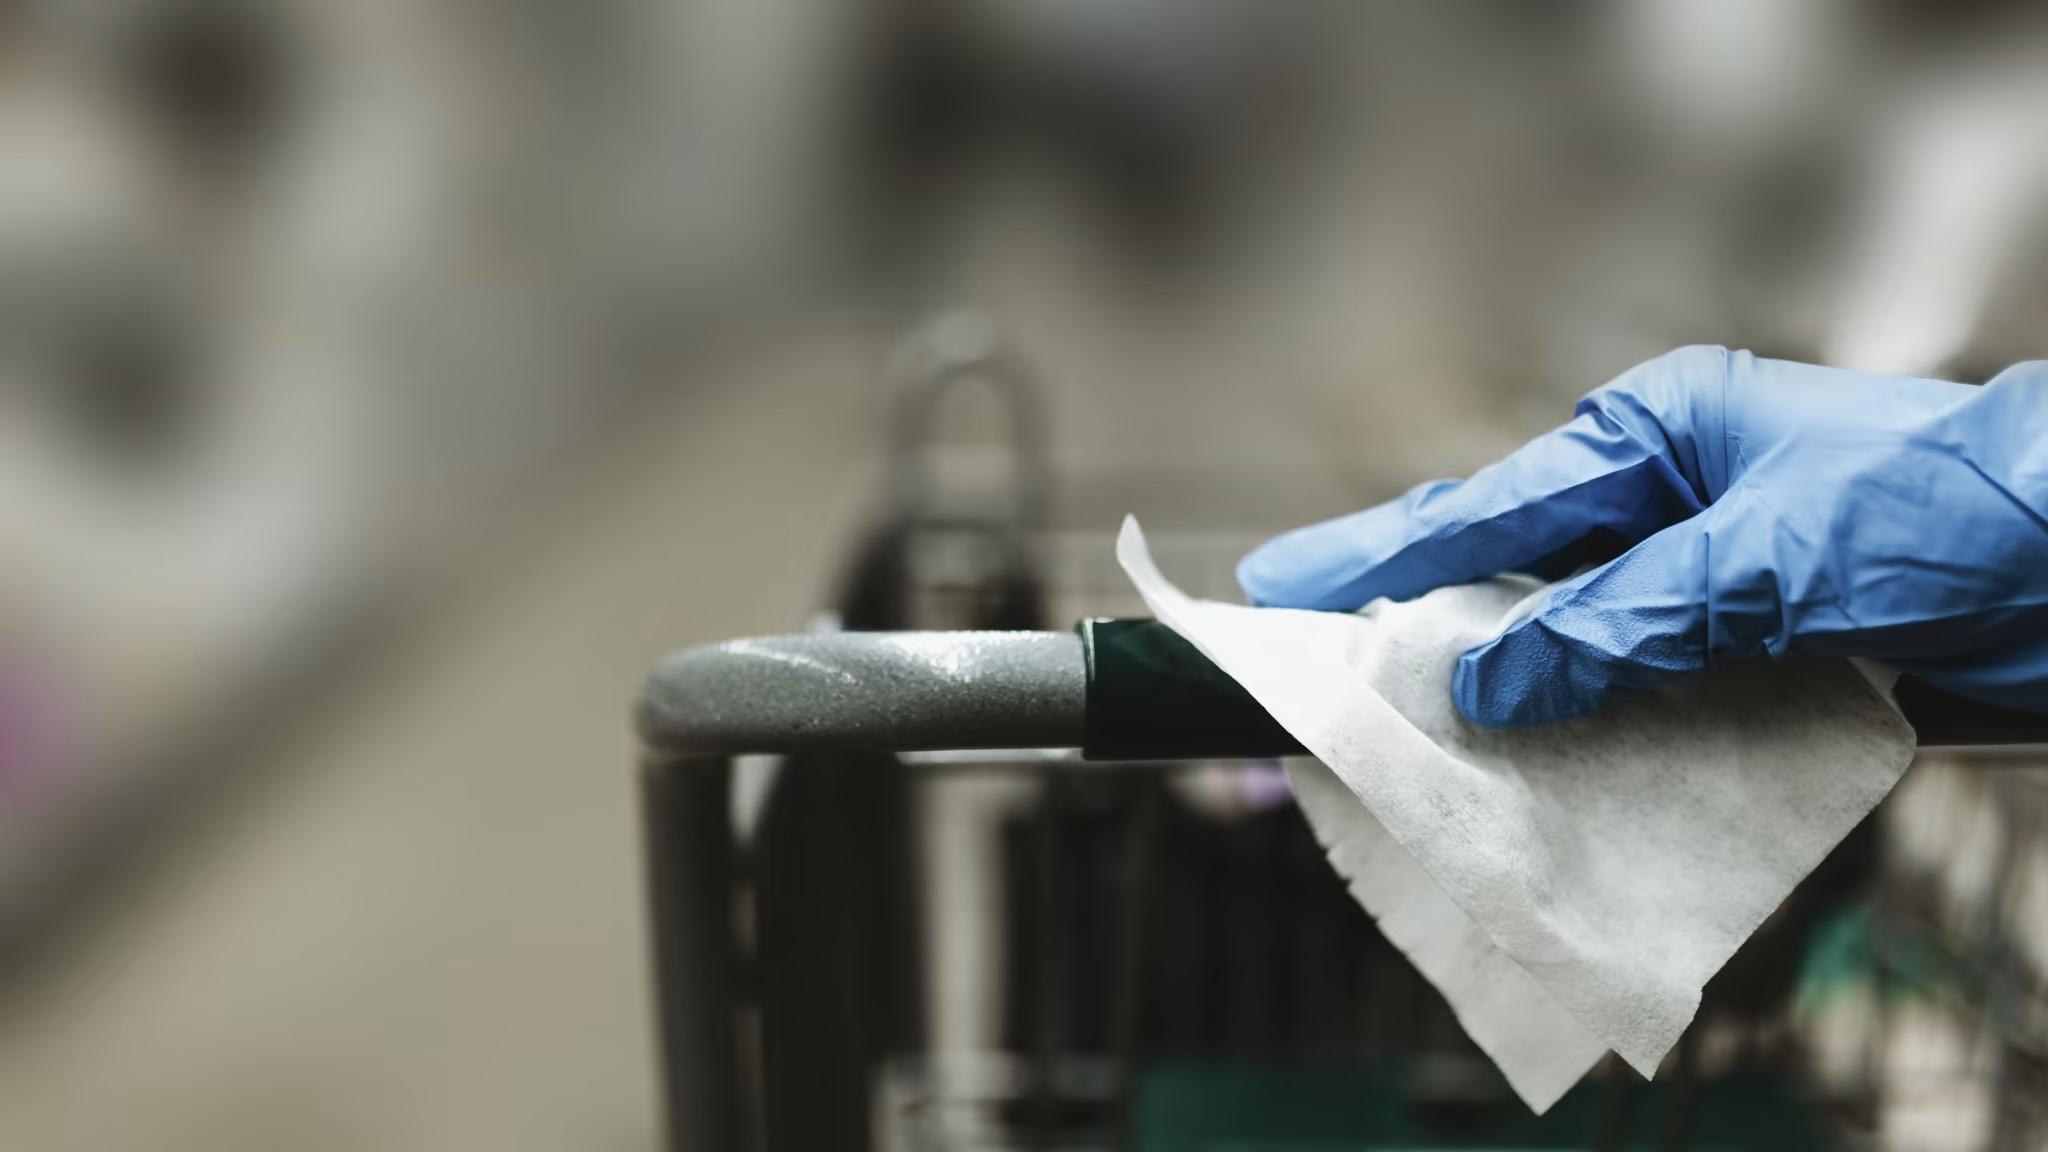 grocery store cart being wiped and sanitized by staff member wearing rubber gloves